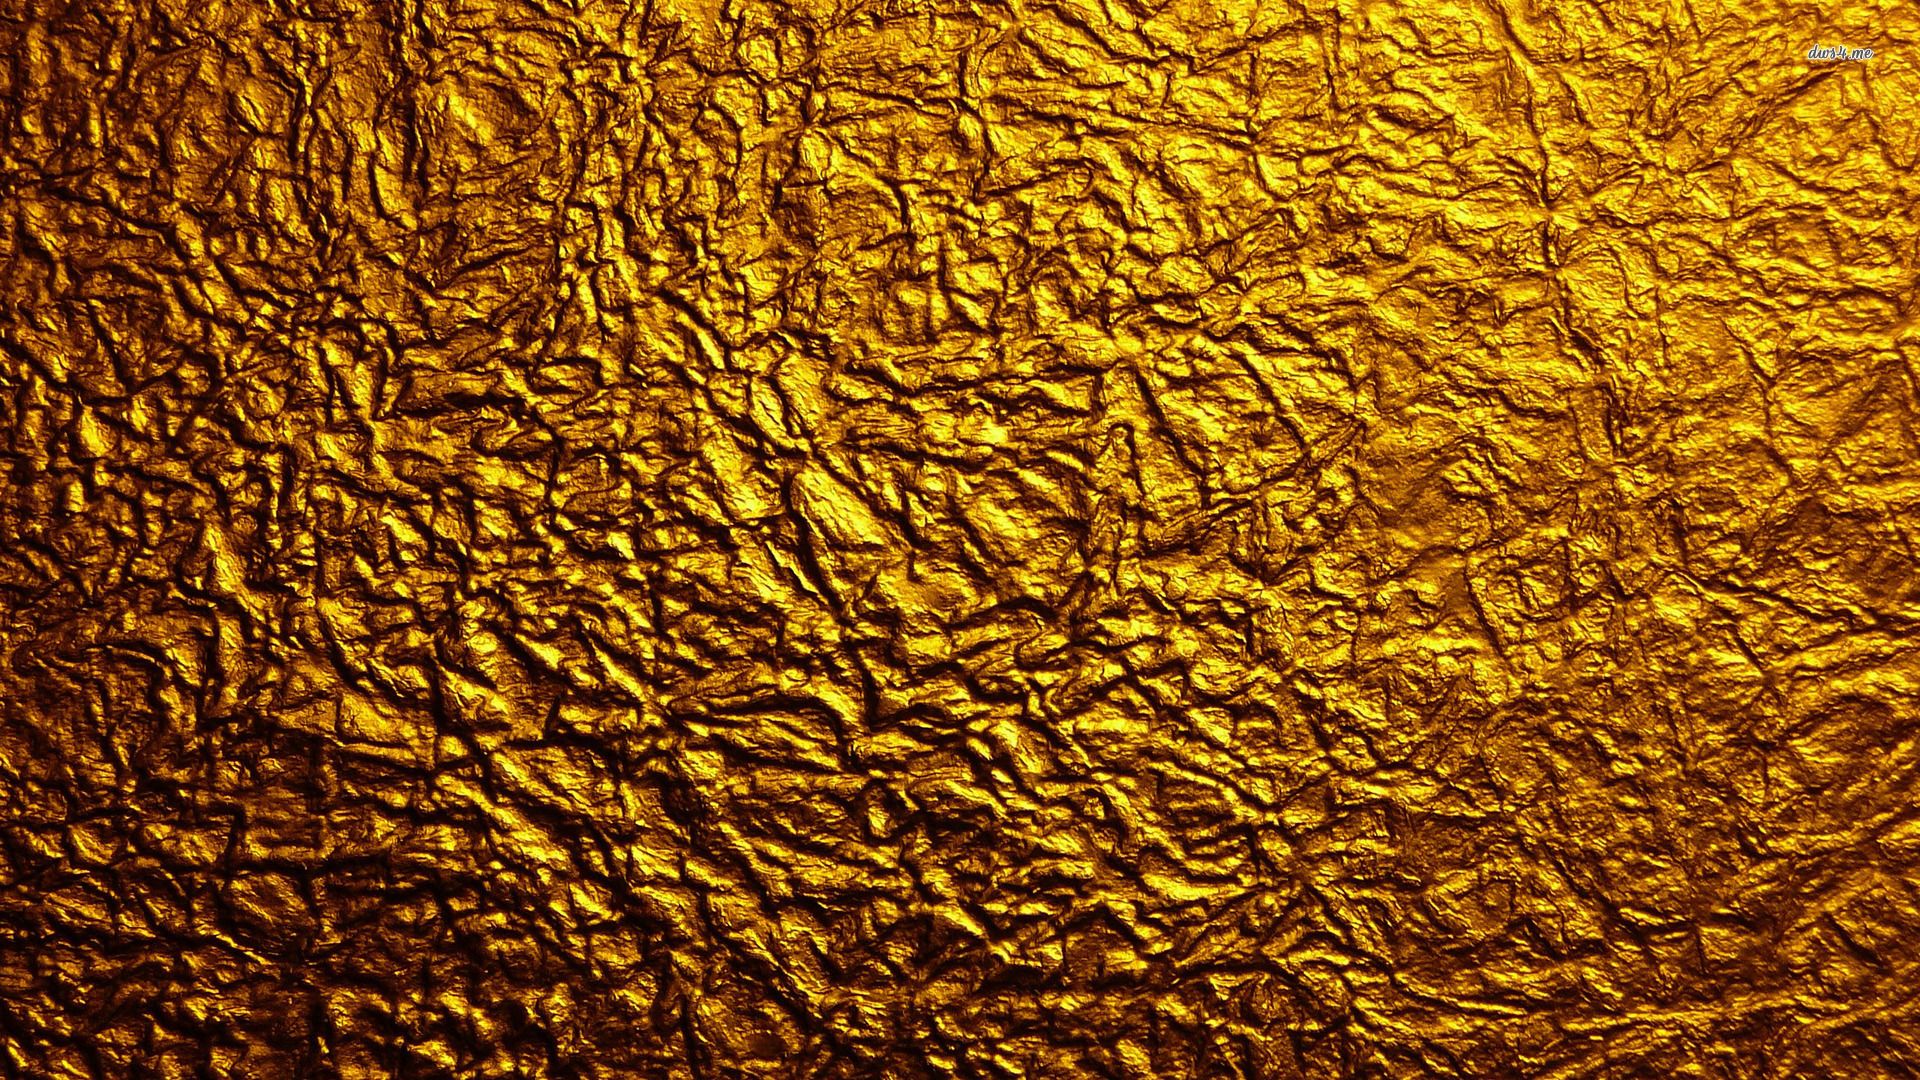 Free download Gold Abstract Wallpaper Golden texutre wallpaper [1920x1080] for your Desktop, Mobile & Tablet. Explore Gold Abstract Wallpaper. Gold Wallpaper Image, Yellow Abstract Wallpaper, Black and Gold Wallpaper Border